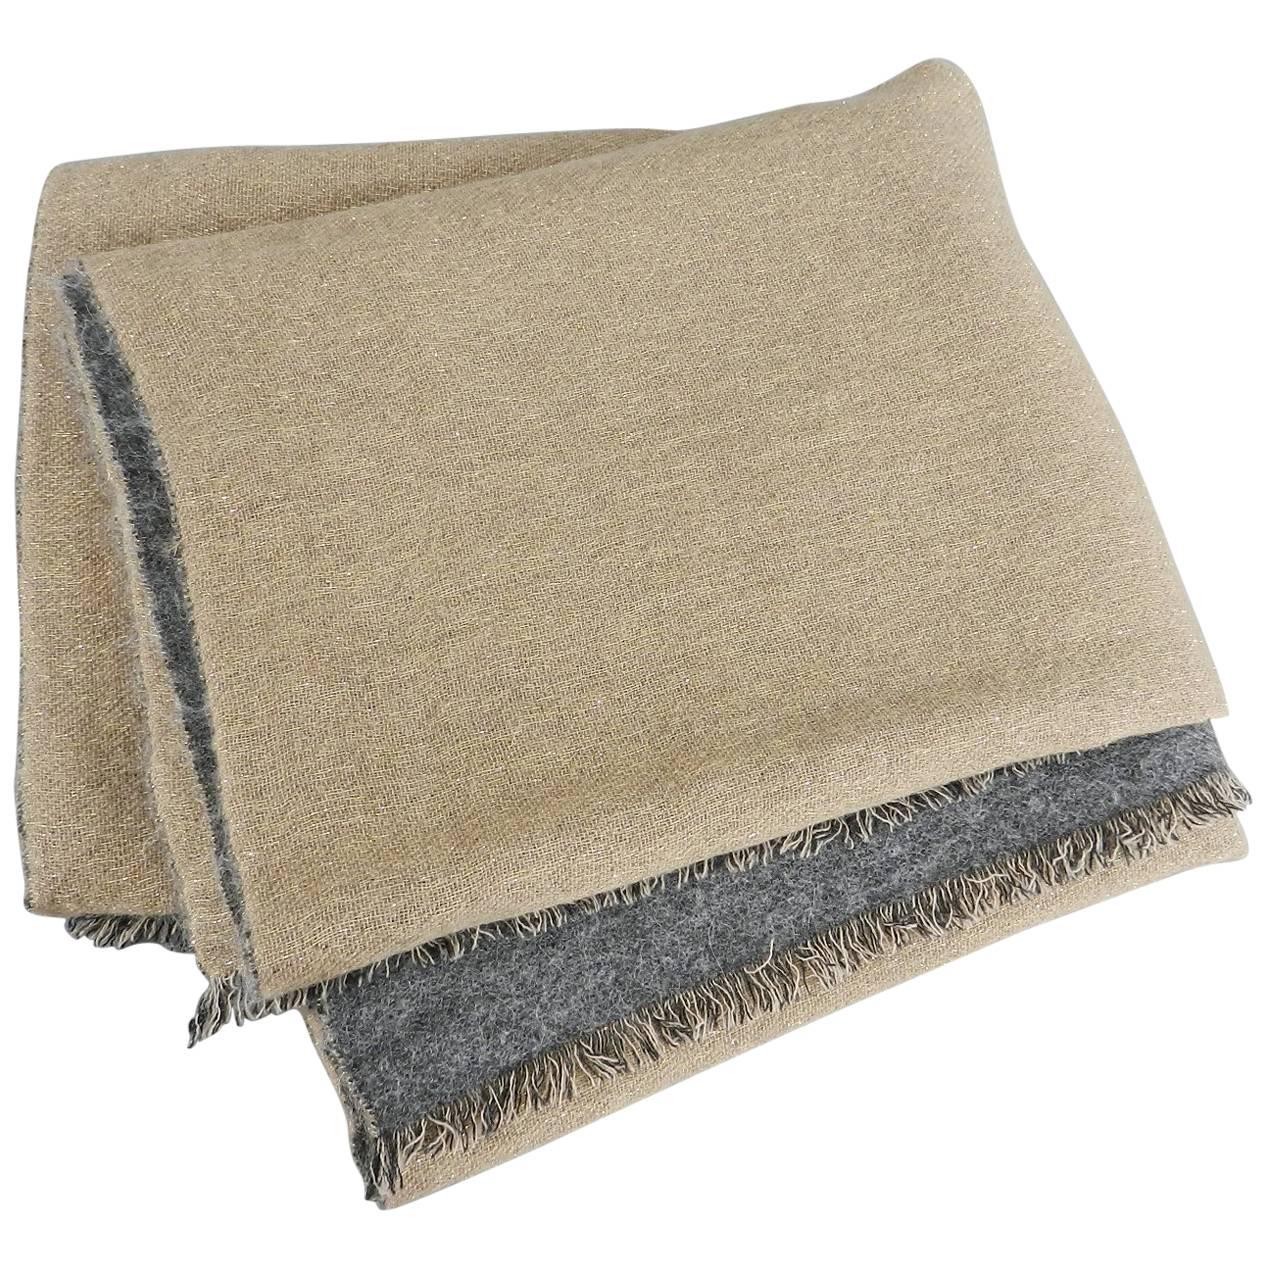 Brunello Cucinelli Gold and Grey Double Sided Large Cashmere Scarf Shawl Wrap